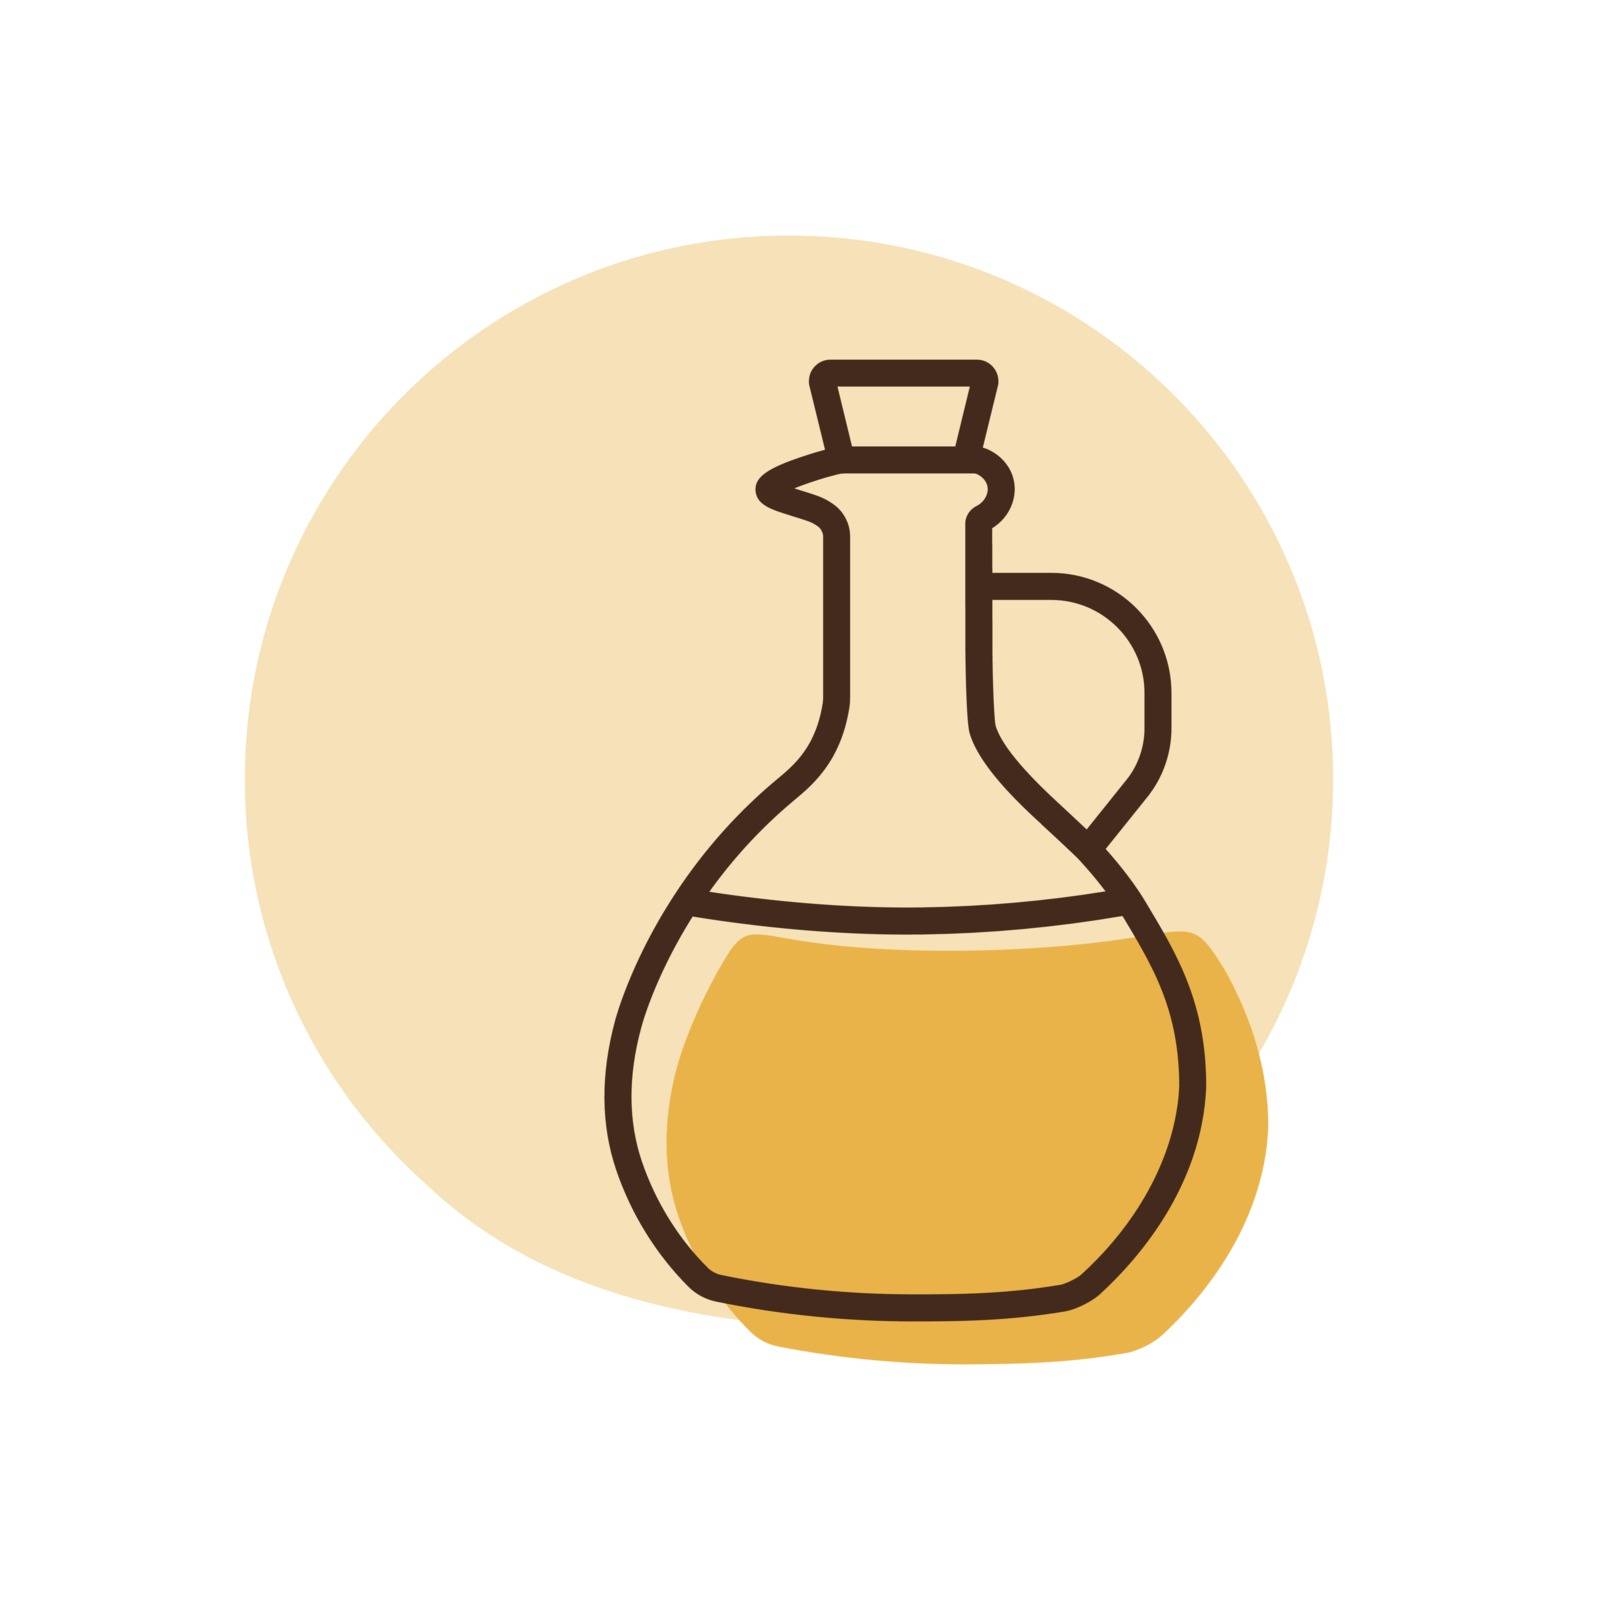 Olive Oil Glass Jug Pitcher vector icon by nosik